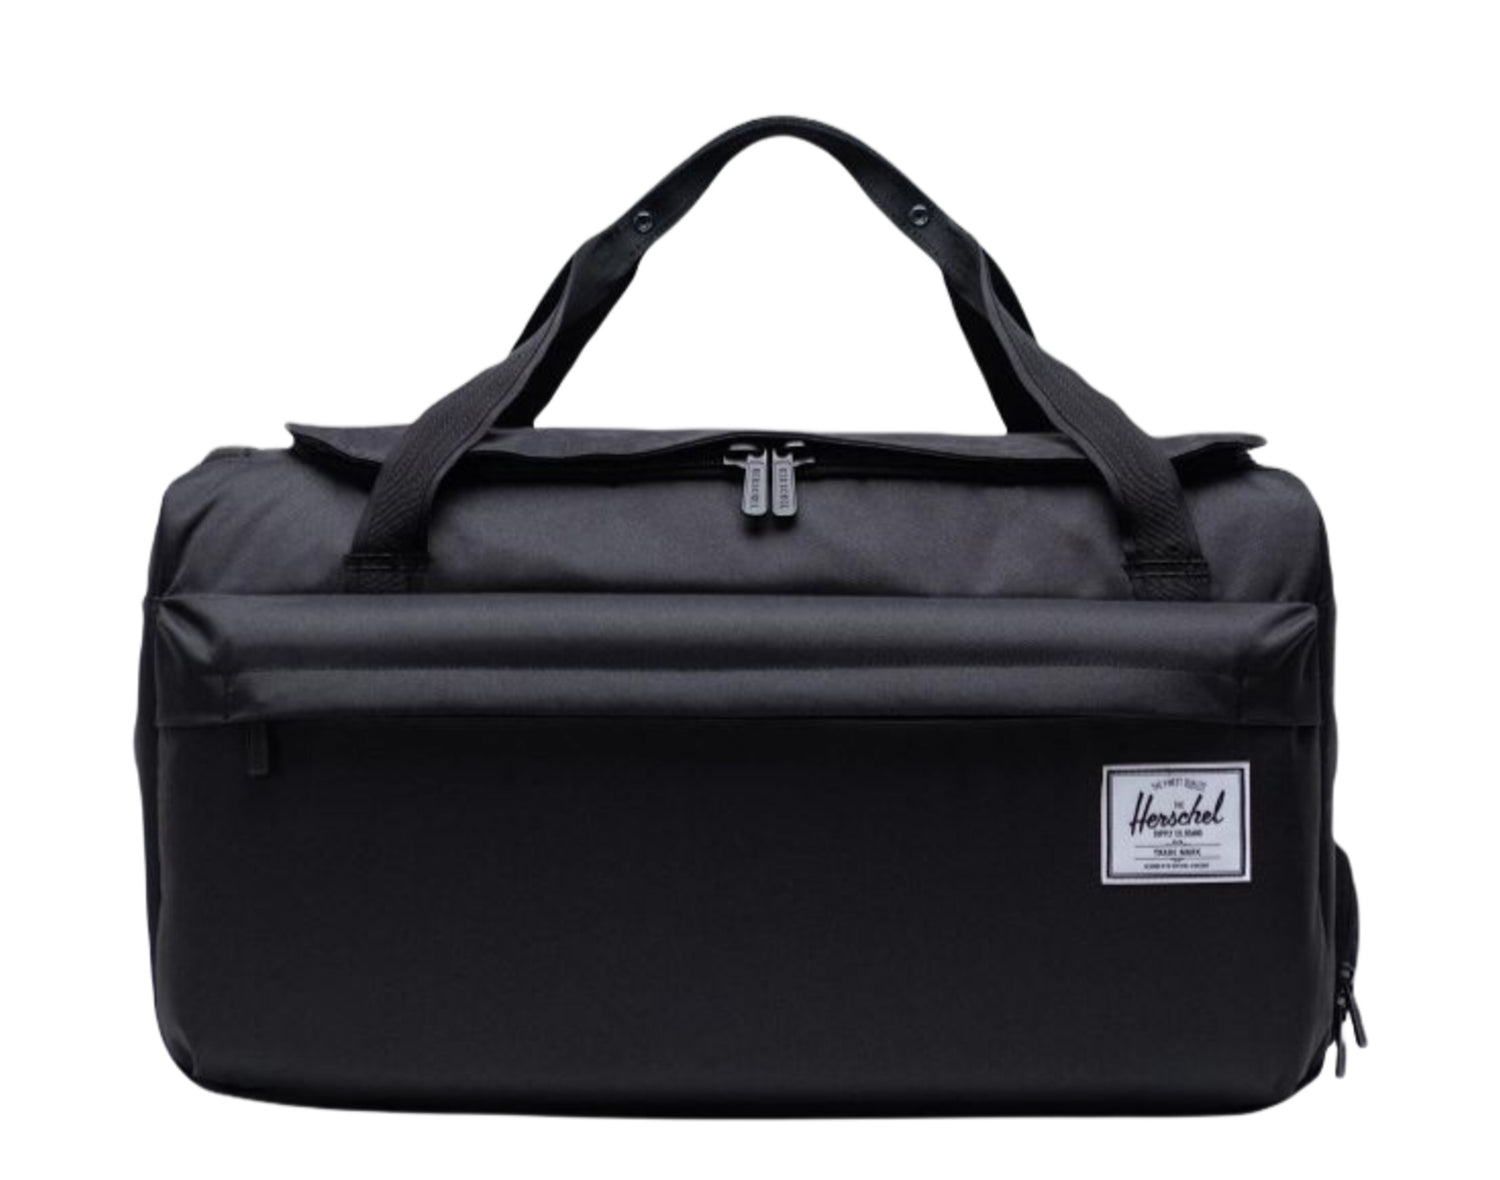 Herschel Supply Co. Outfitter Luggage Duffle Bag